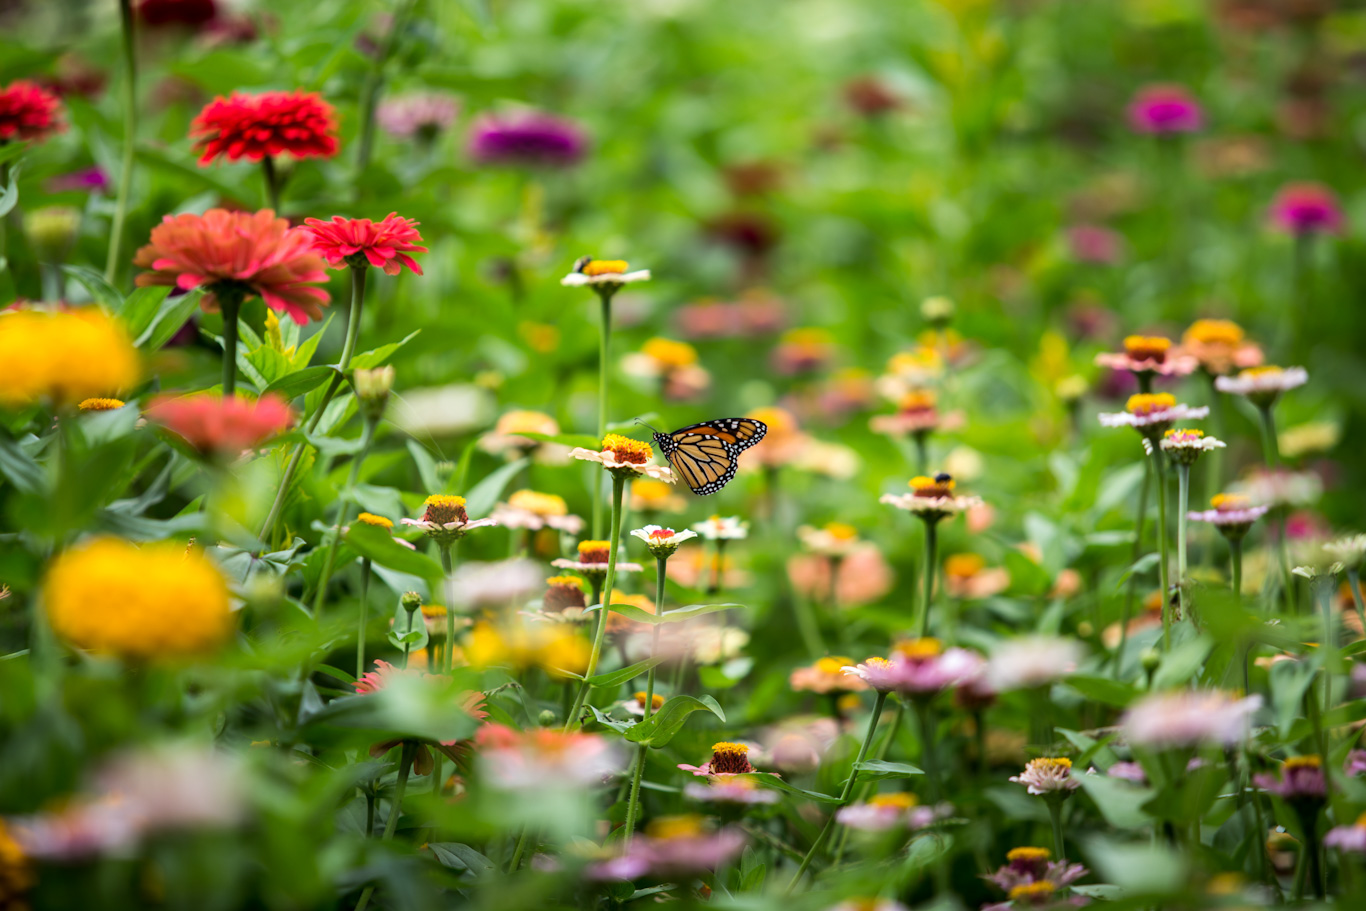 A monarch butterfly is perched on a flower in a garden filled with many colorful flowers.